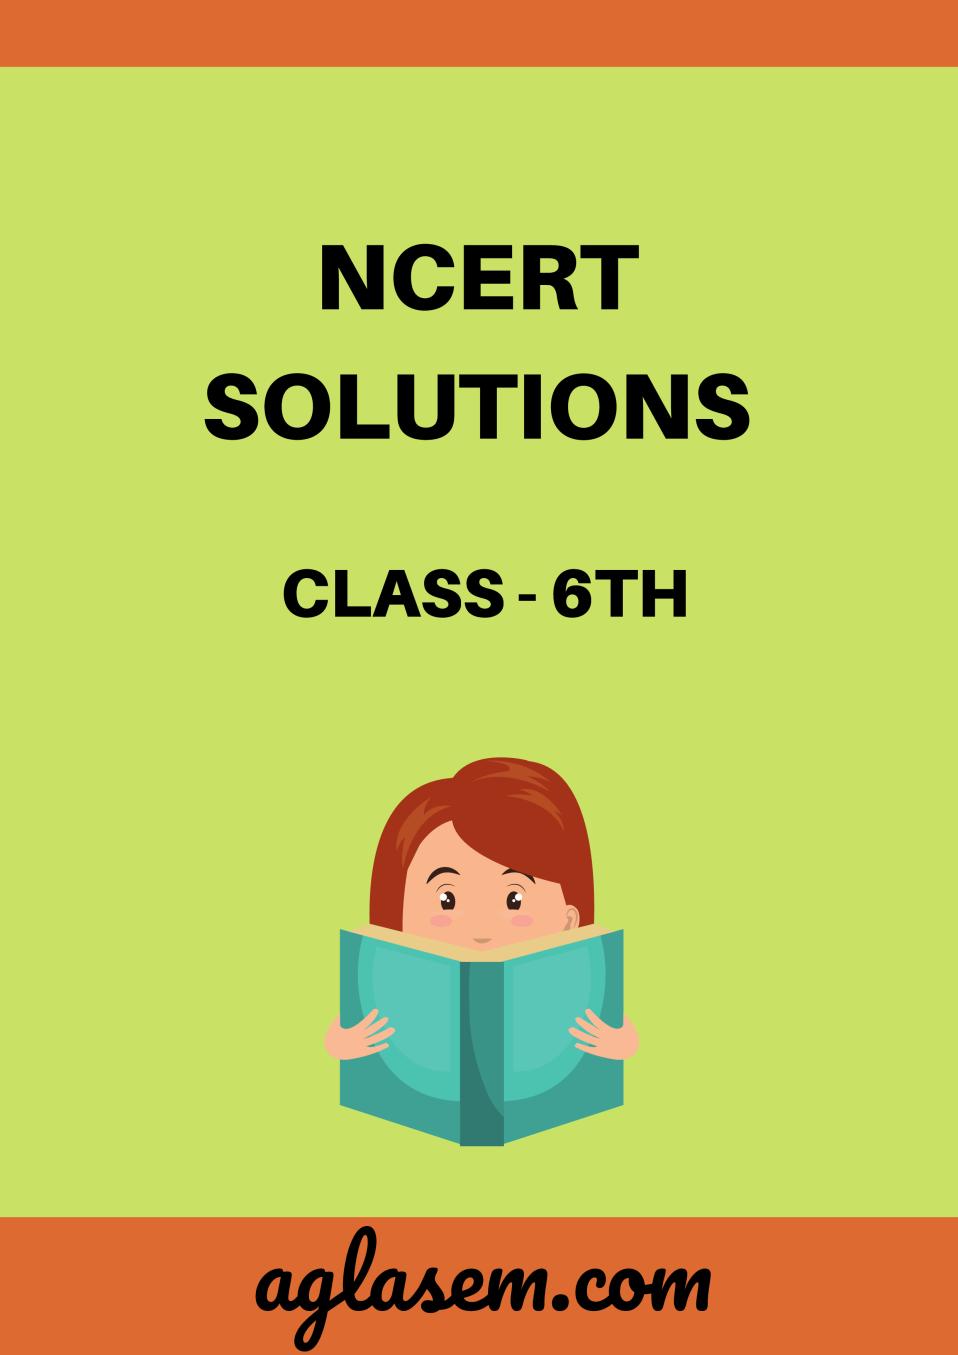 NCERT Solutions for Class 6 Social Science (नागरिक शास्त्र) Chapter 3 सरकार क्या है ? - Page 1